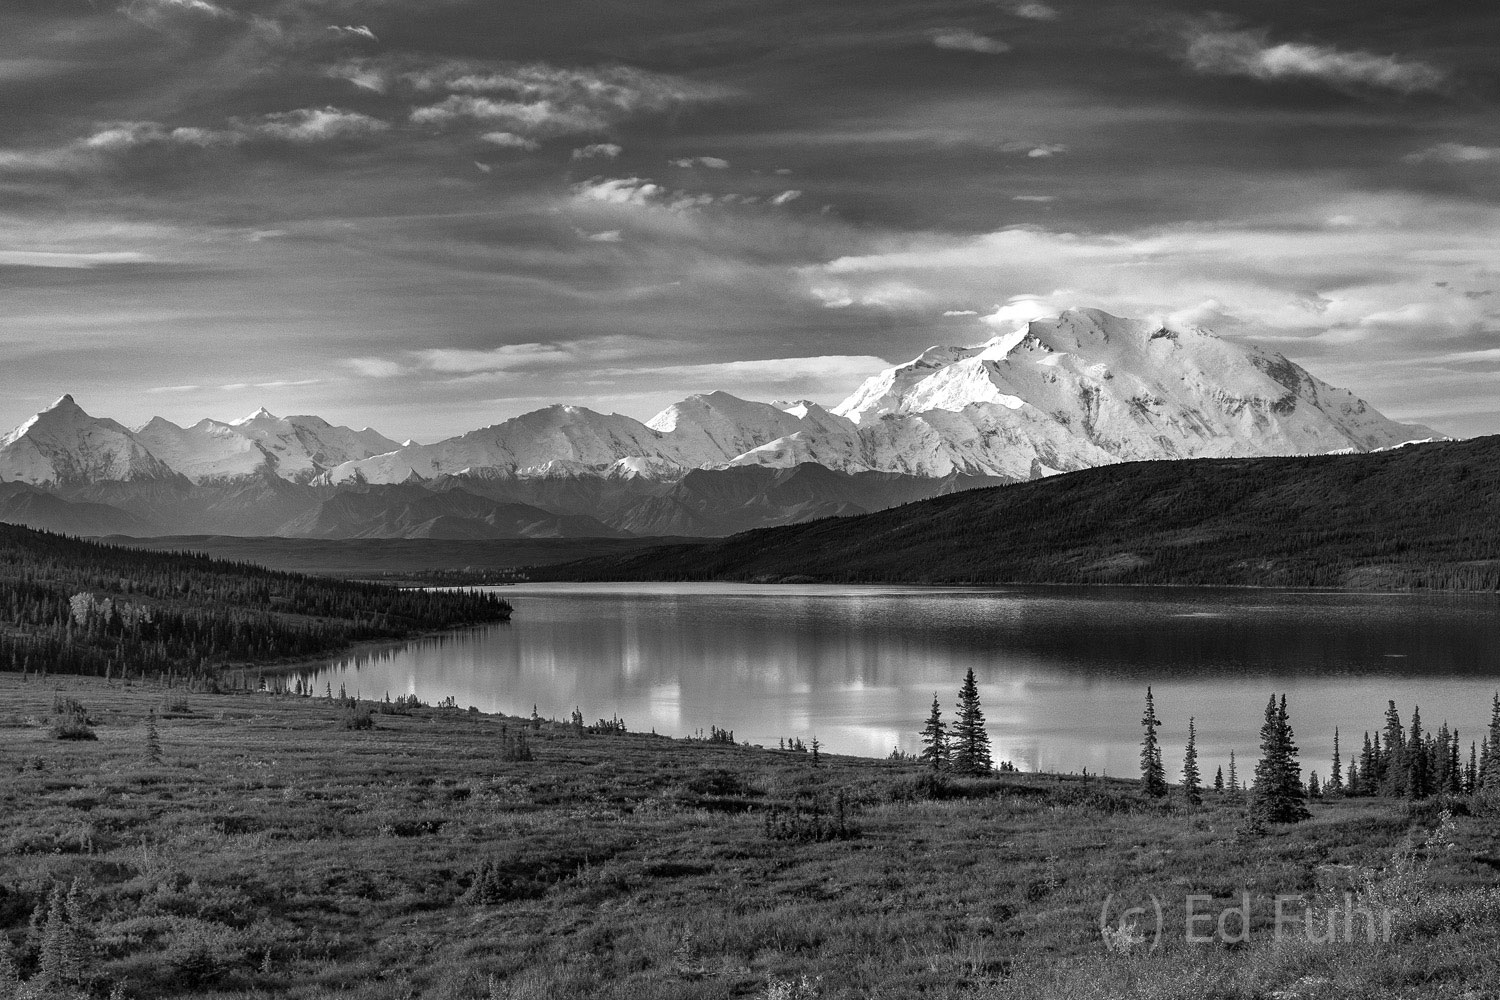 An ode to Ansel Adams who photographed this scene of Wonder Lake and Denali in 1947 and marveled then that "Alaska is one of...